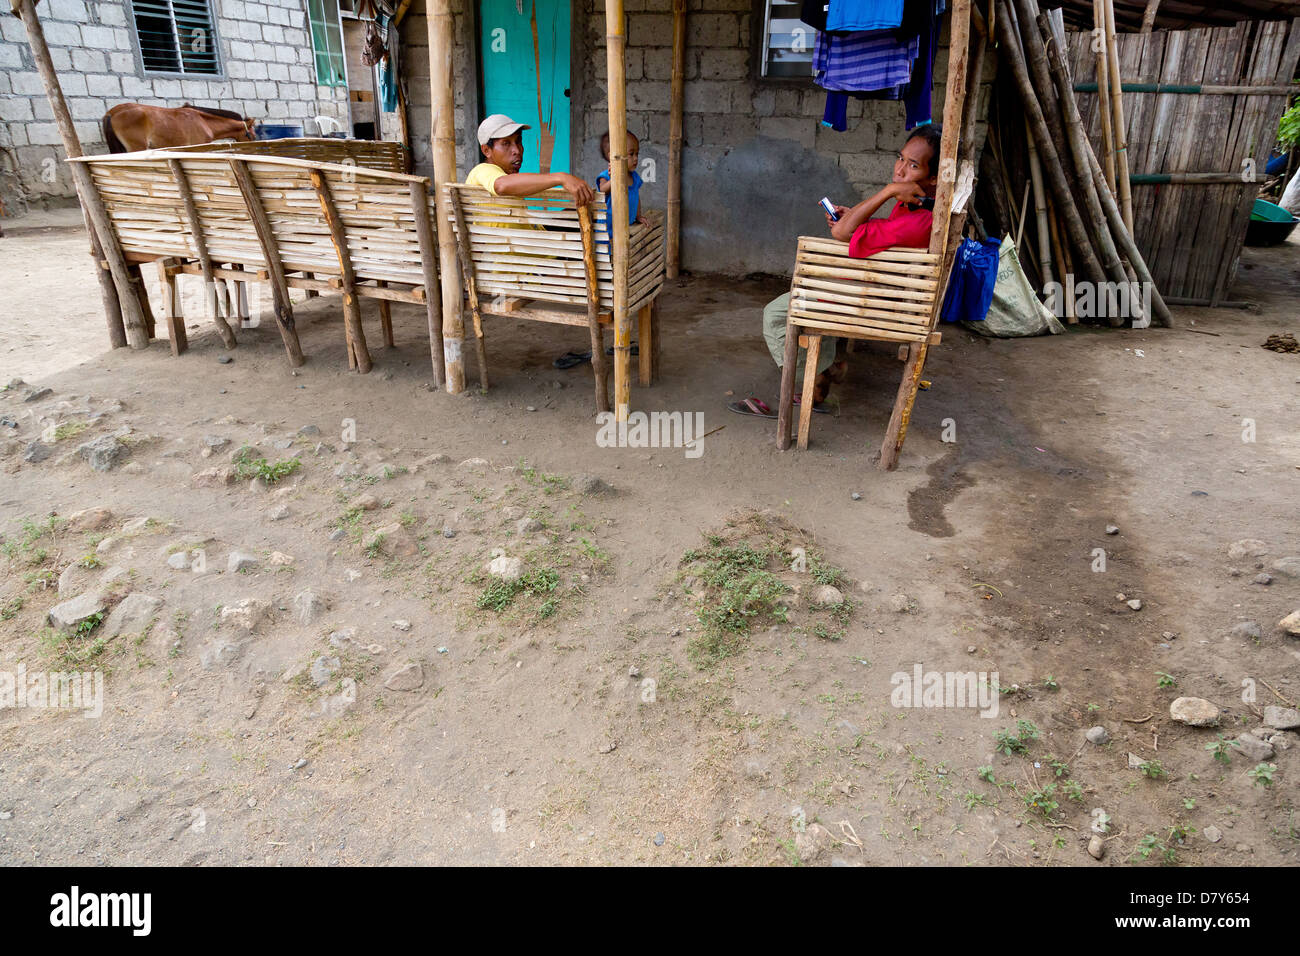 Men sitting in front of a House on the Taal Volcanic Island in the Philippines Stock Photo